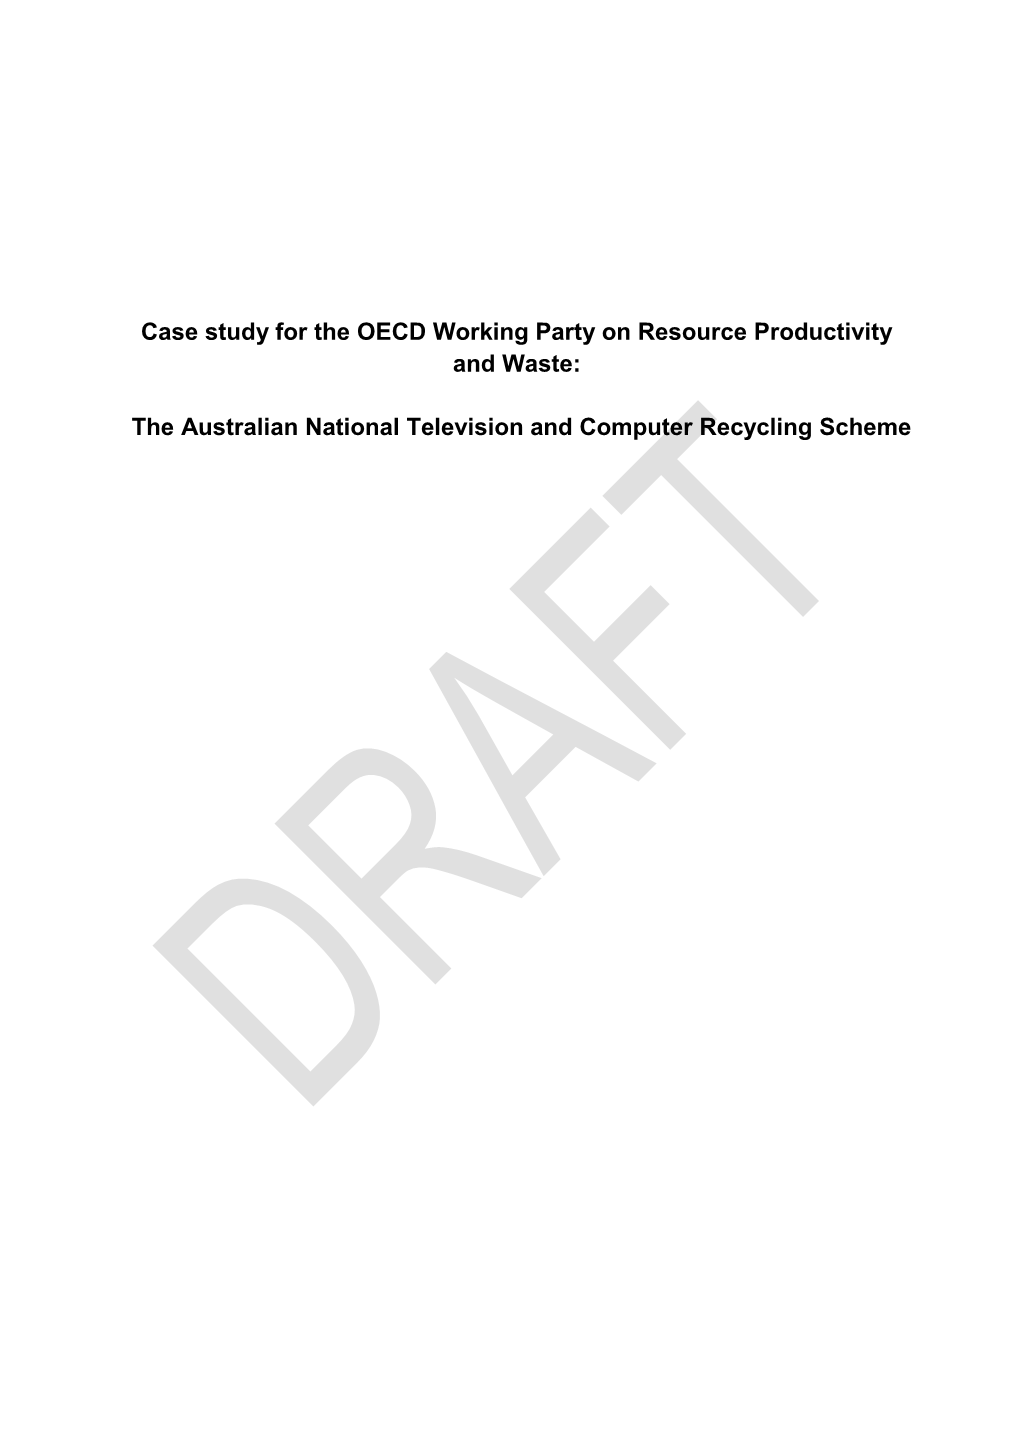 The Australian National Television and Computer Recycling Scheme